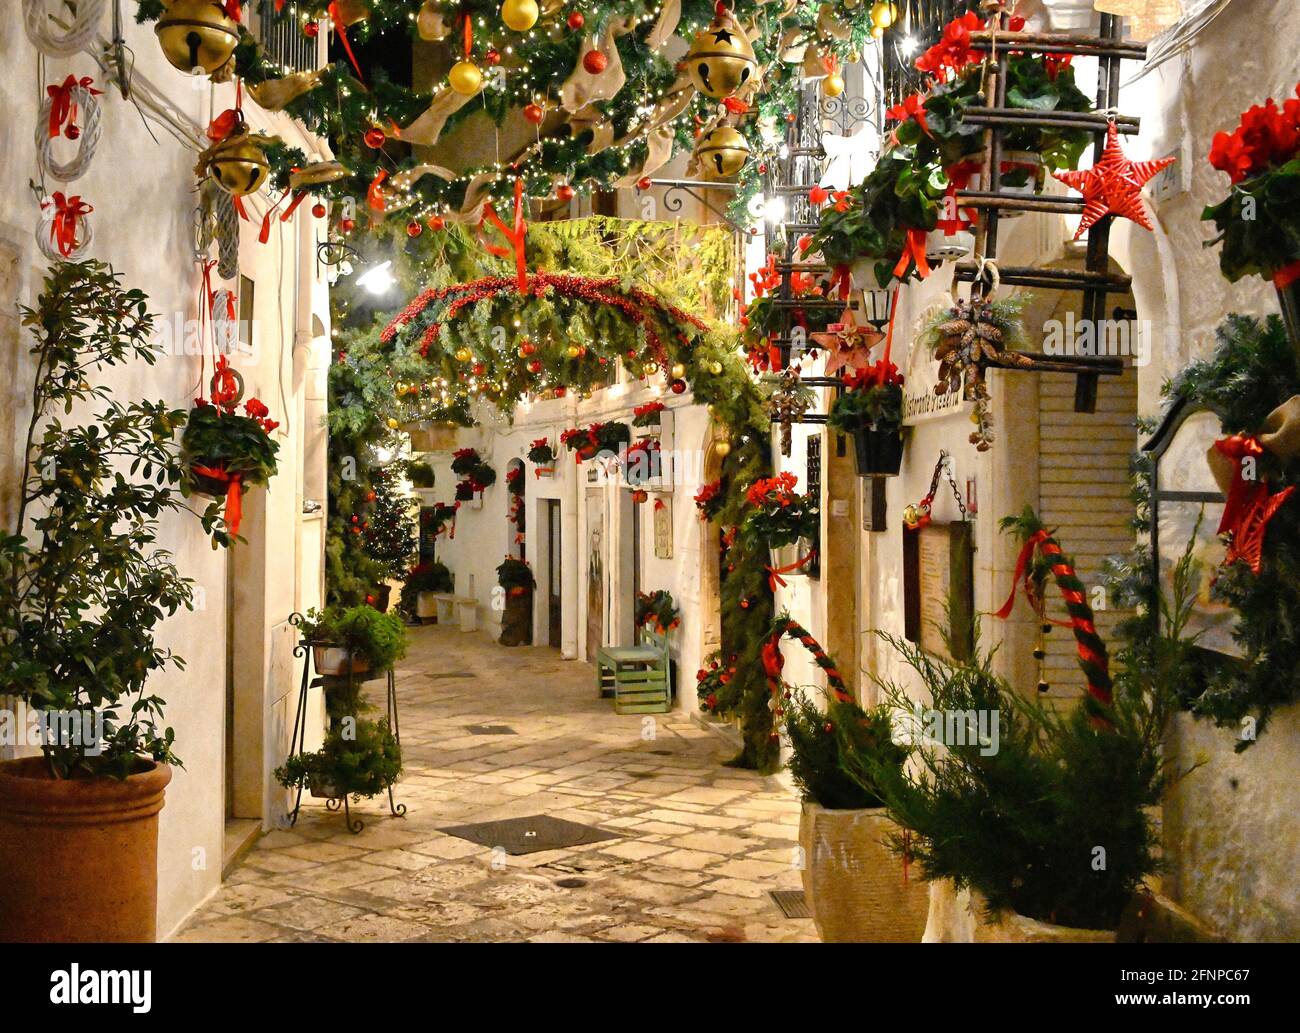 Christmas decorations in the Old Town, Locorotondo, Italy Stock Photo